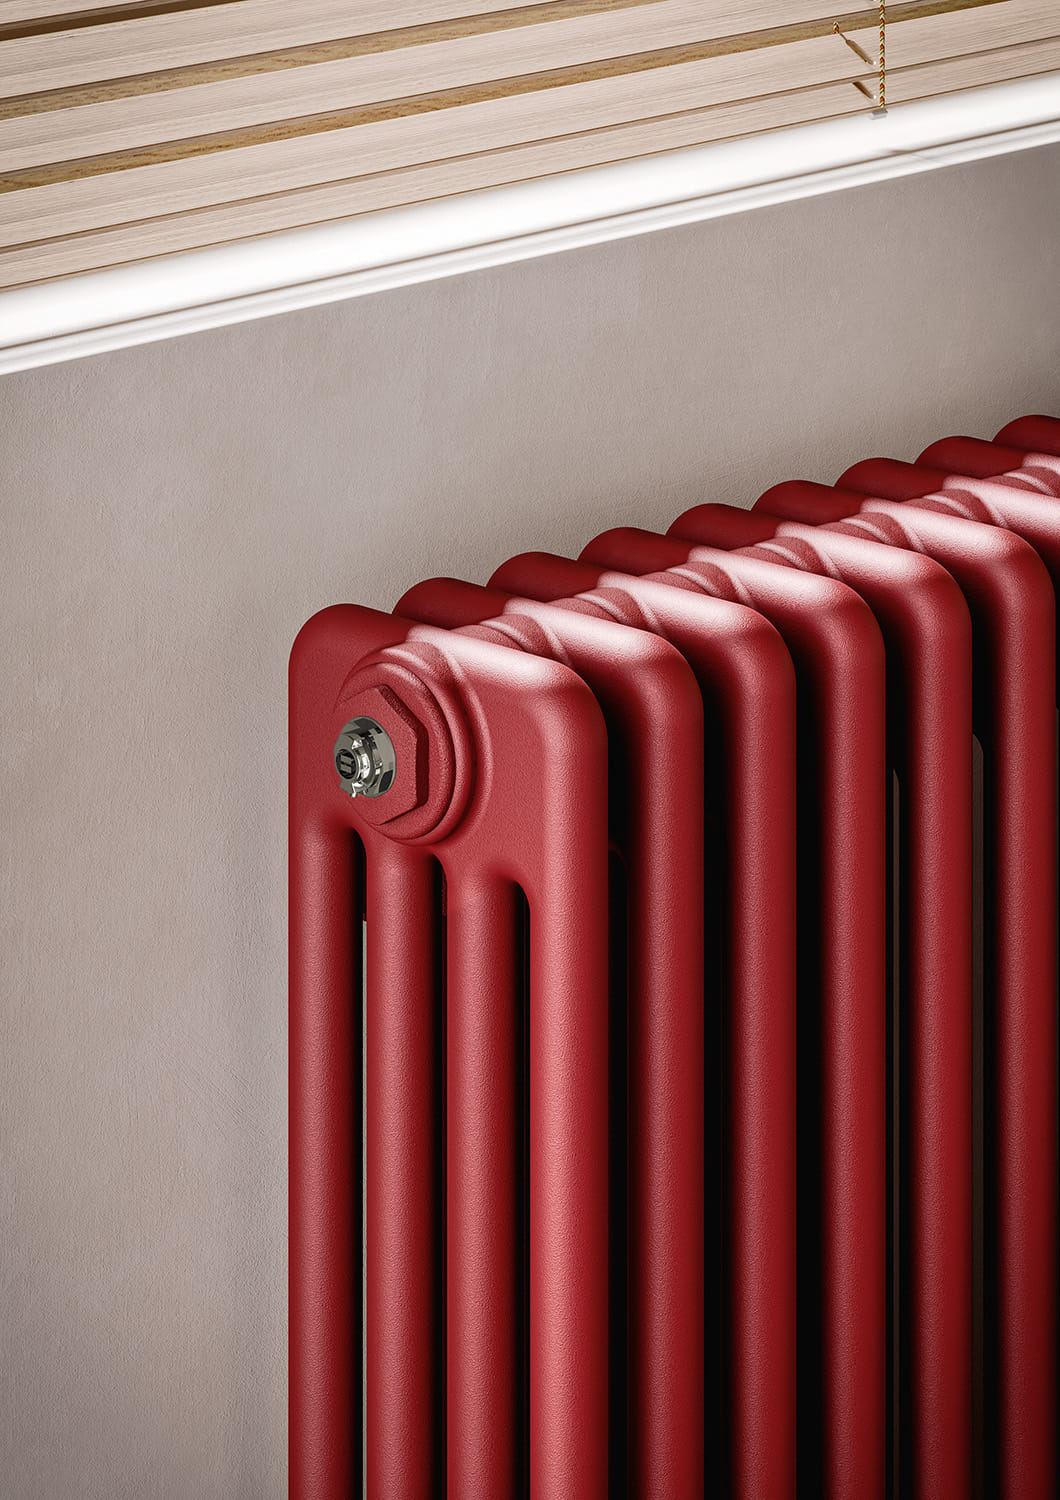 Tesi 4, 30 elements, Hight 565 mm, Lenght 1350 mm, Flame Red, (detail)